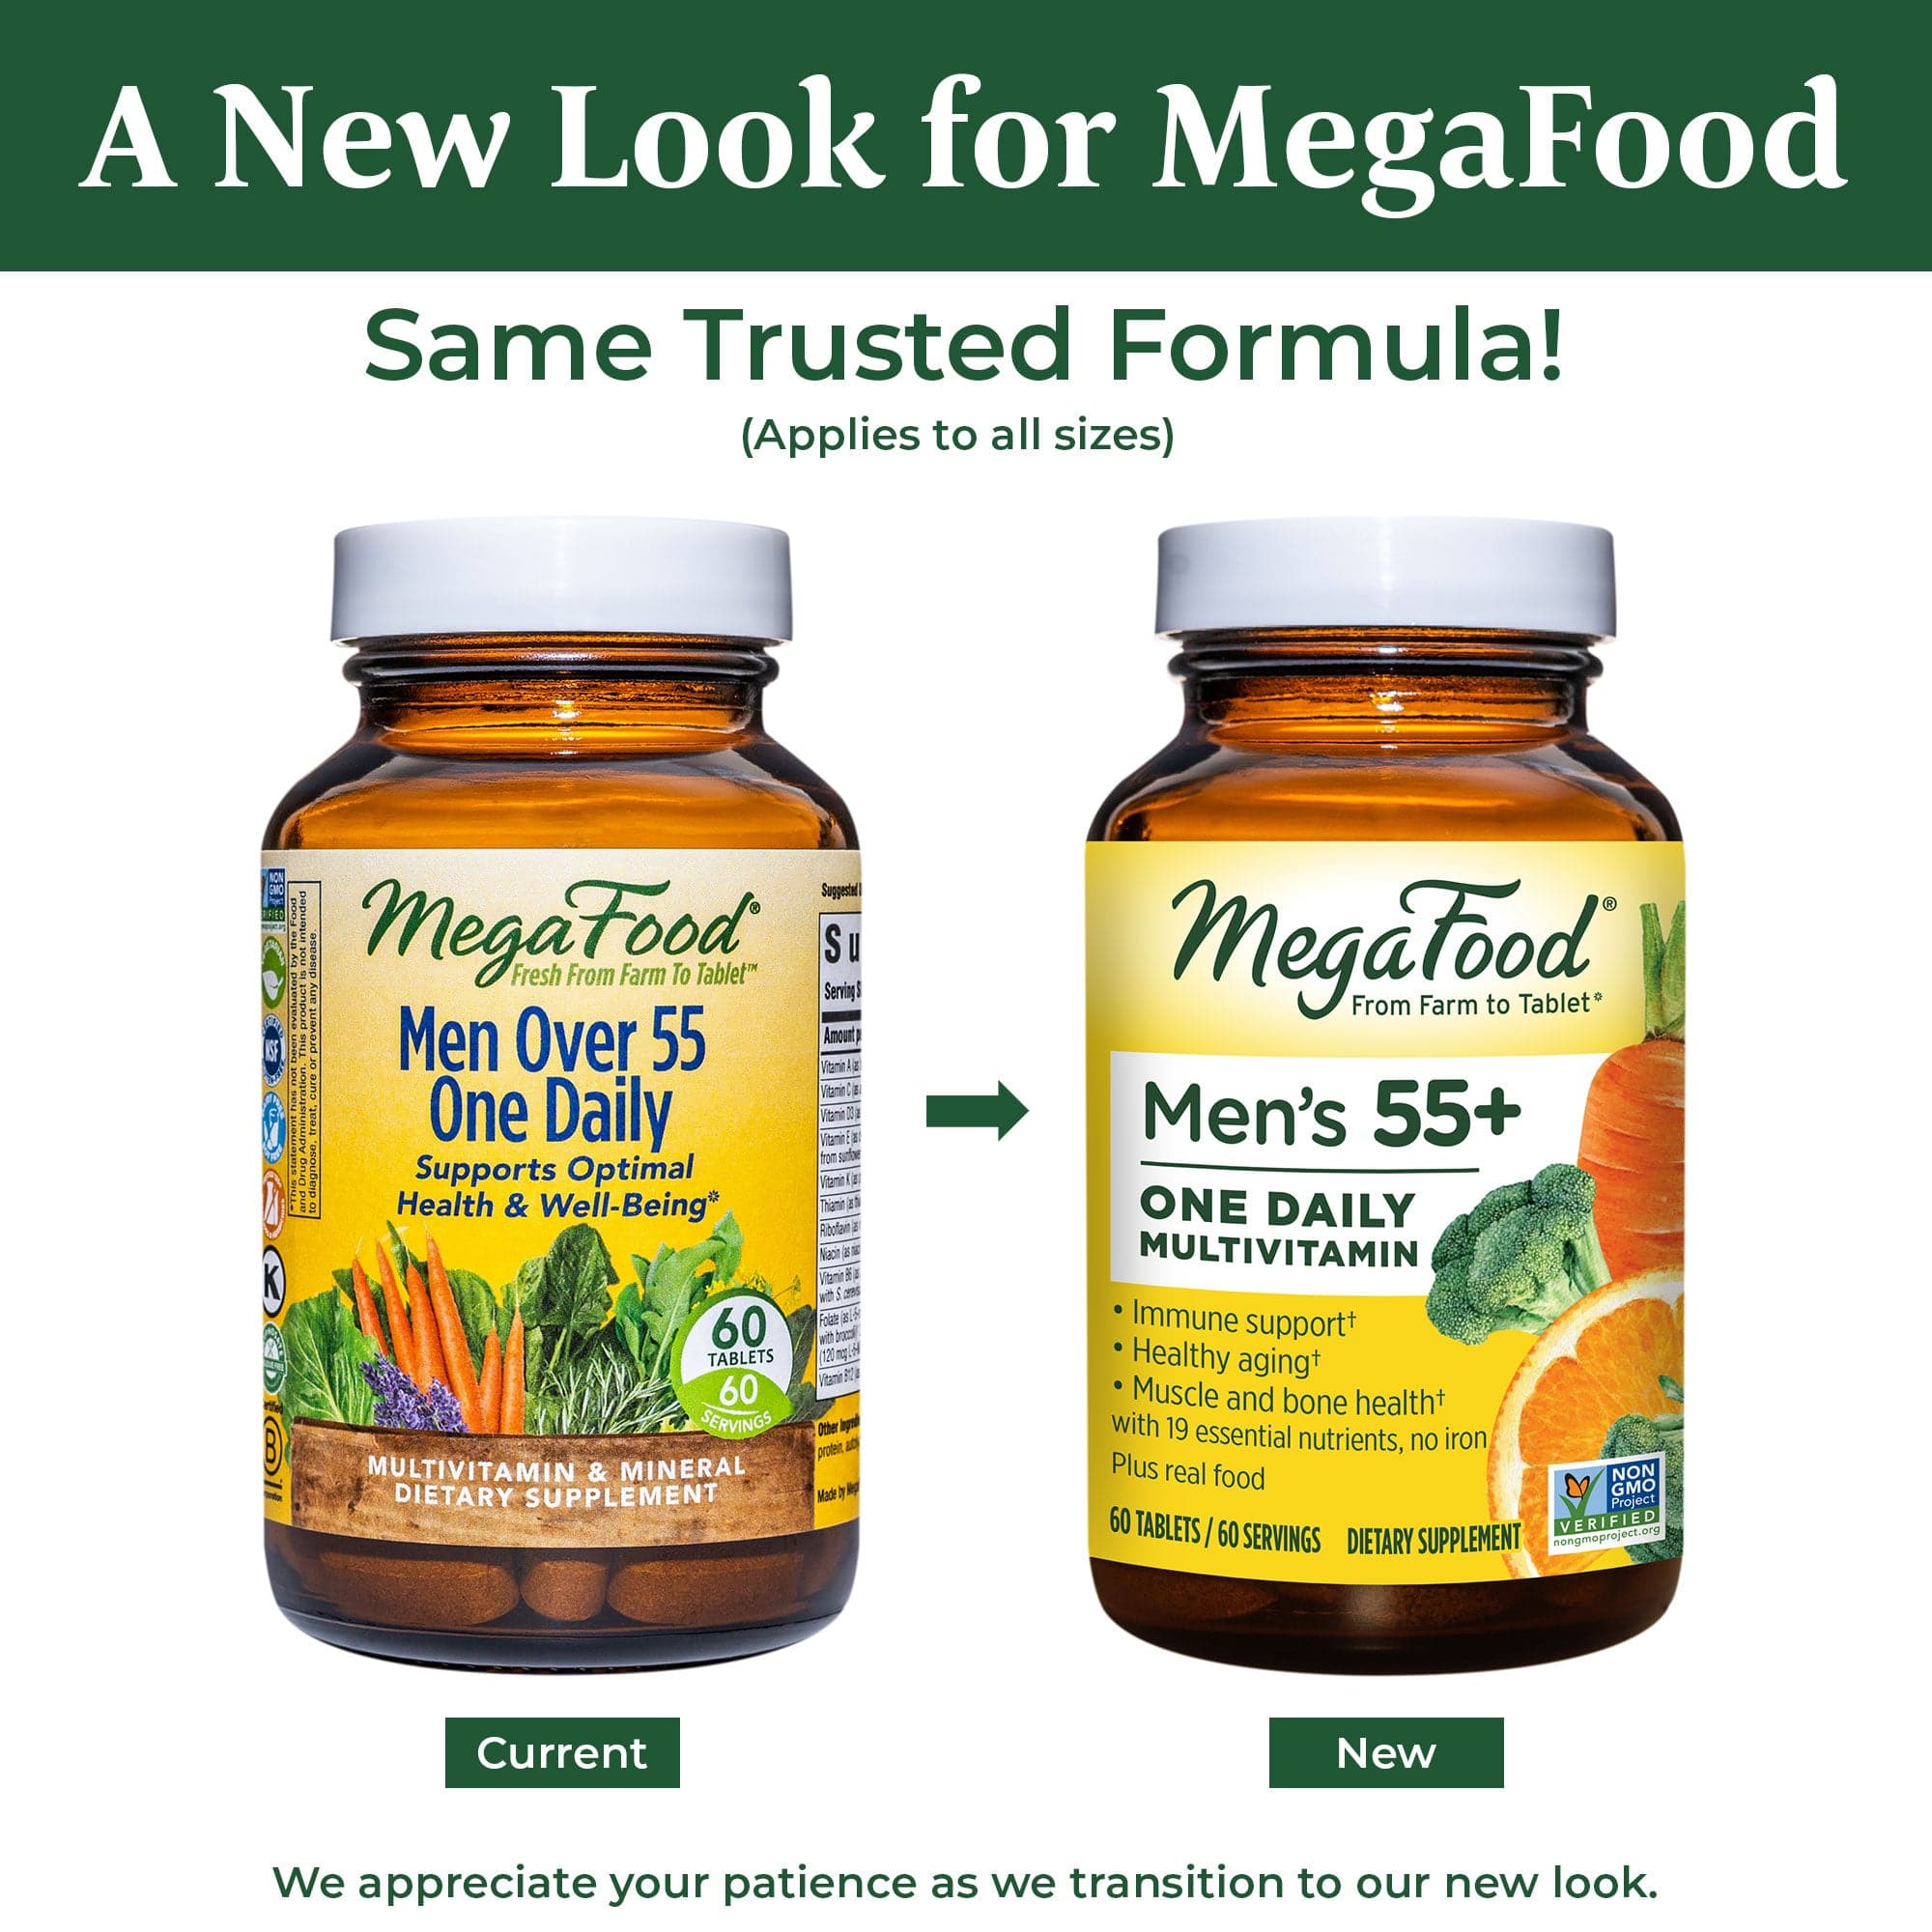 MegaFood Men's 55+ One Daily Multivitamin (Formerly Men Over 55 One Daily)